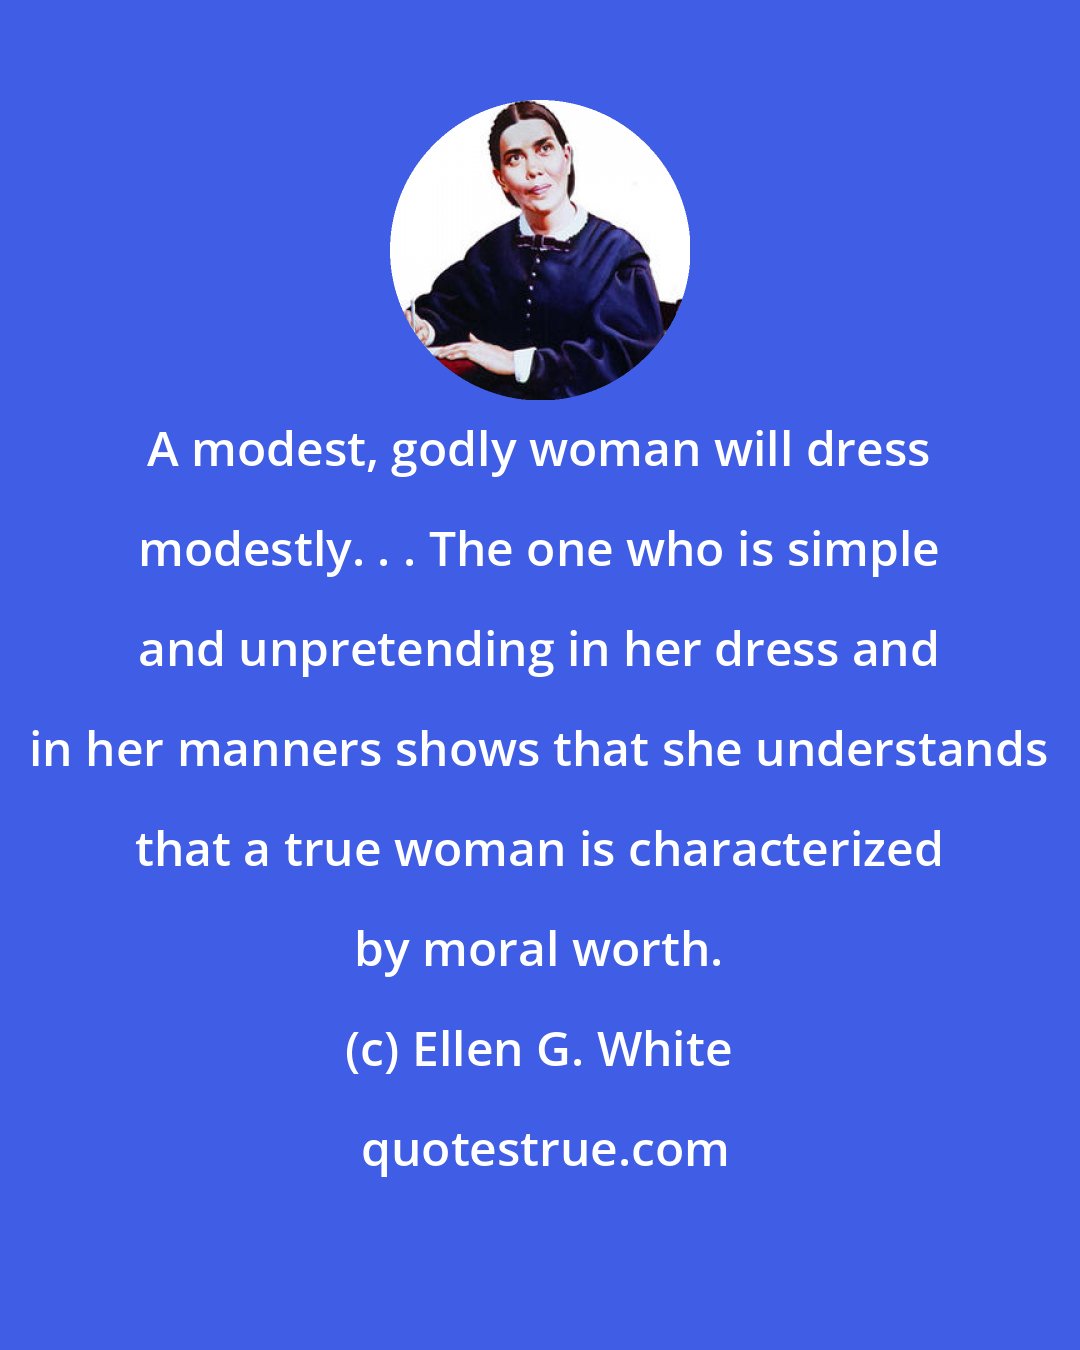 Ellen G. White: A modest, godly woman will dress modestly. . . The one who is simple and unpretending in her dress and in her manners shows that she understands that a true woman is characterized by moral worth.